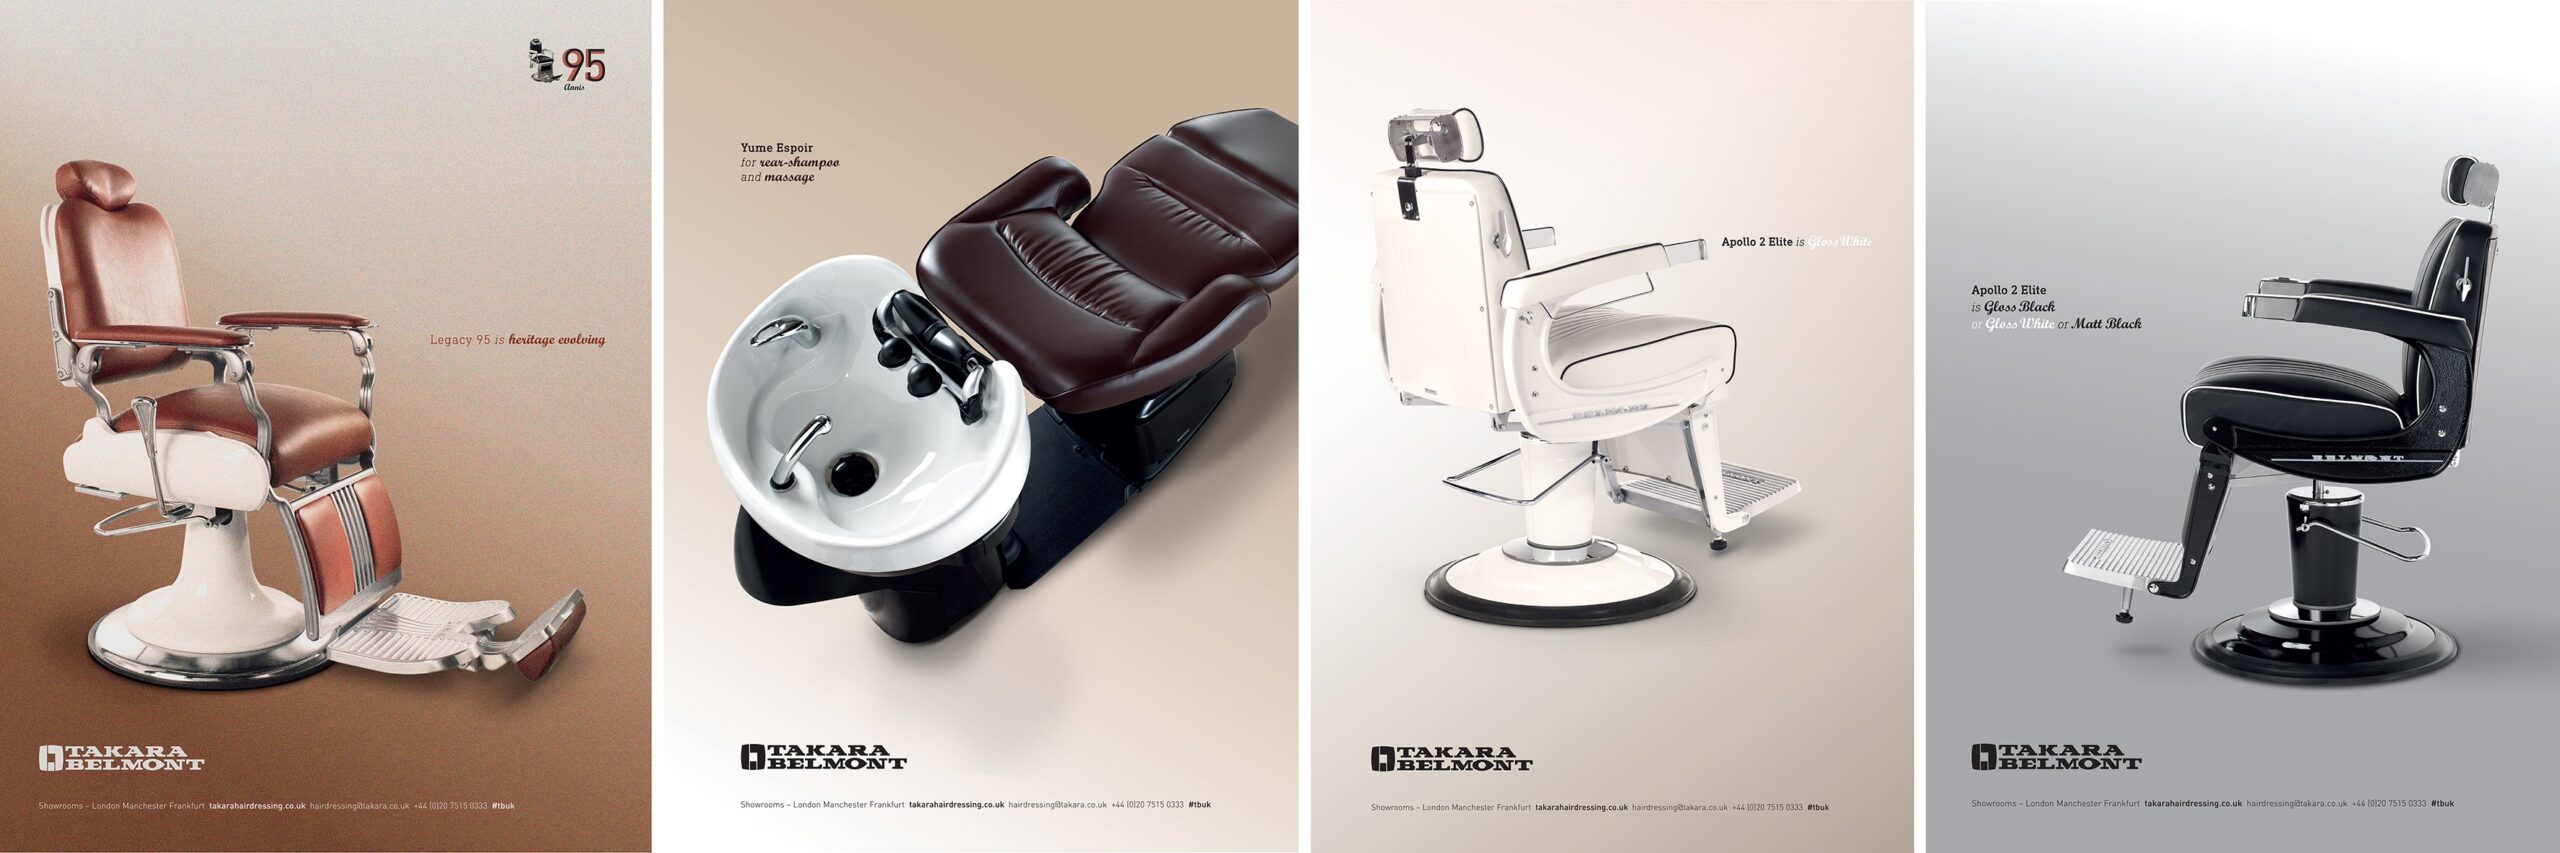 Campaign images for Takara Belmont’s Iconic Chairs